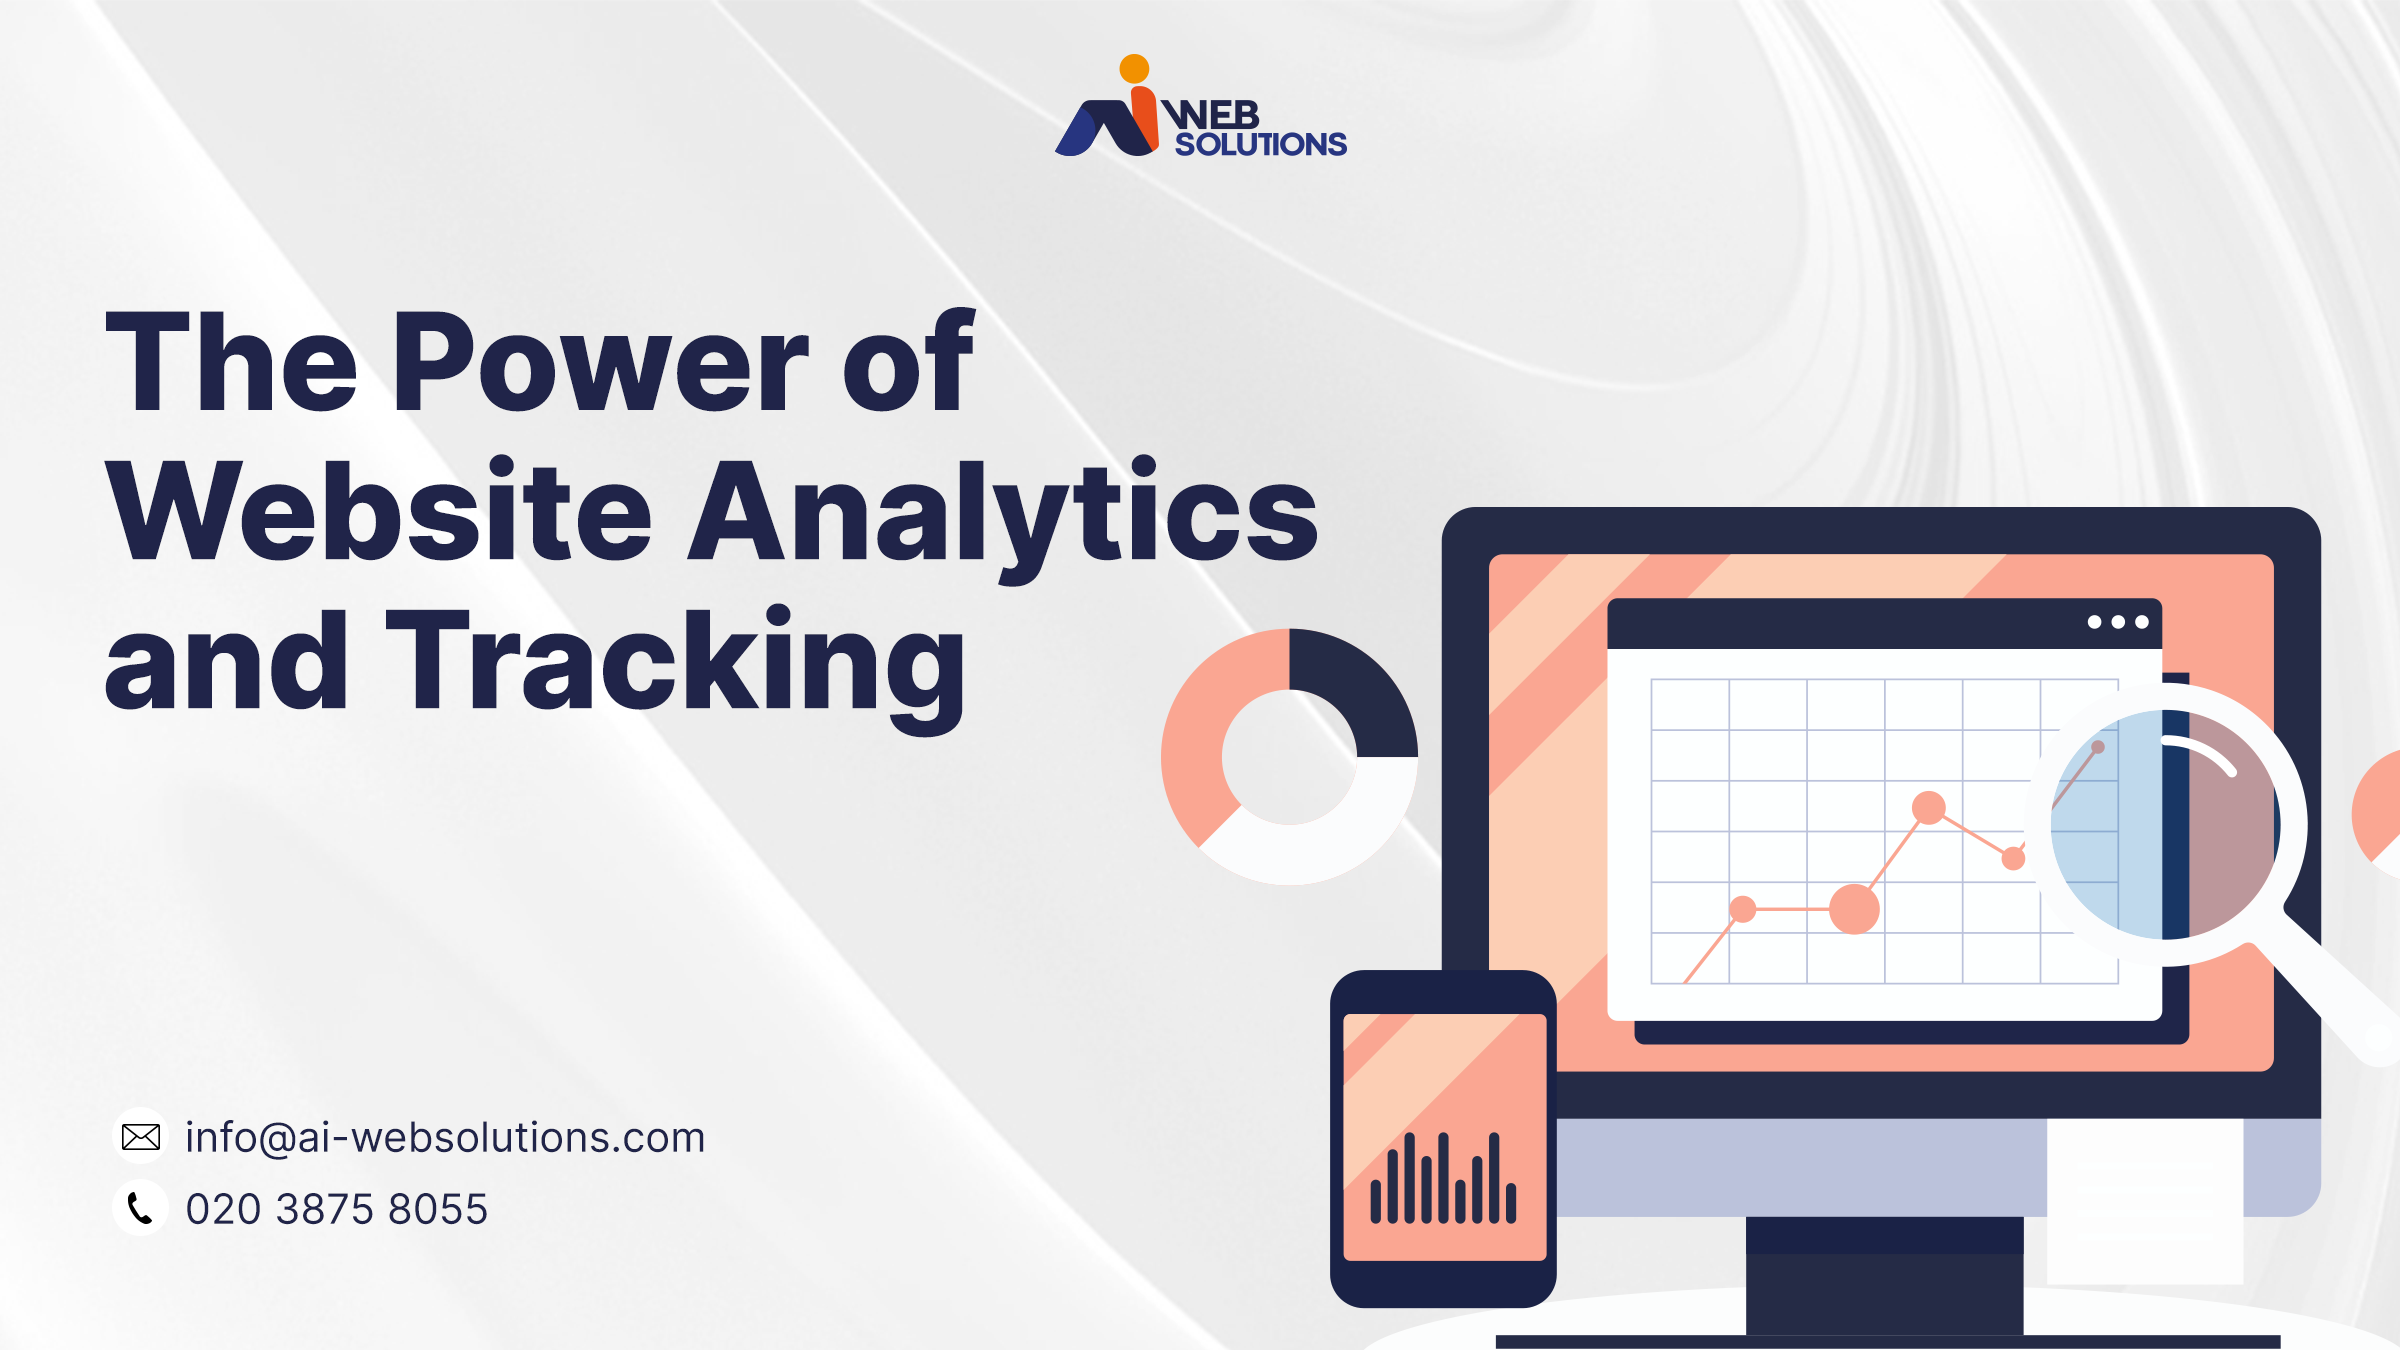 The Power of Website Analytics and Tracking